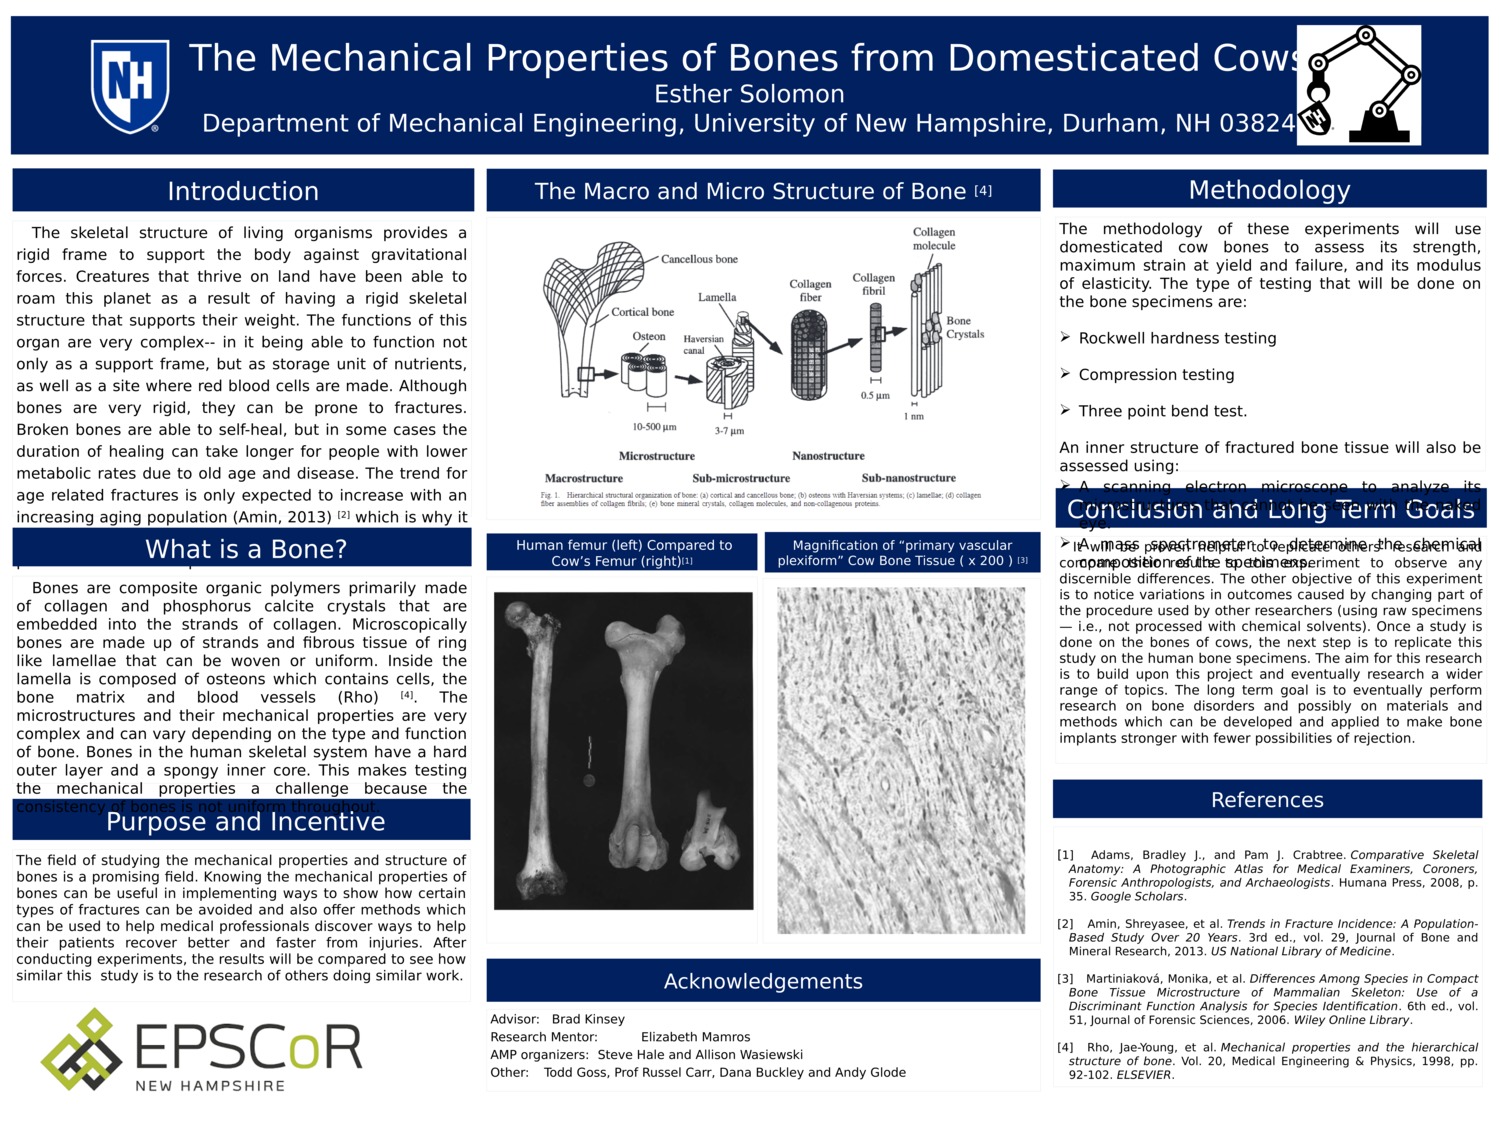 The Mechanical Properties Of Bones From Domesticated Cows by ehs1024